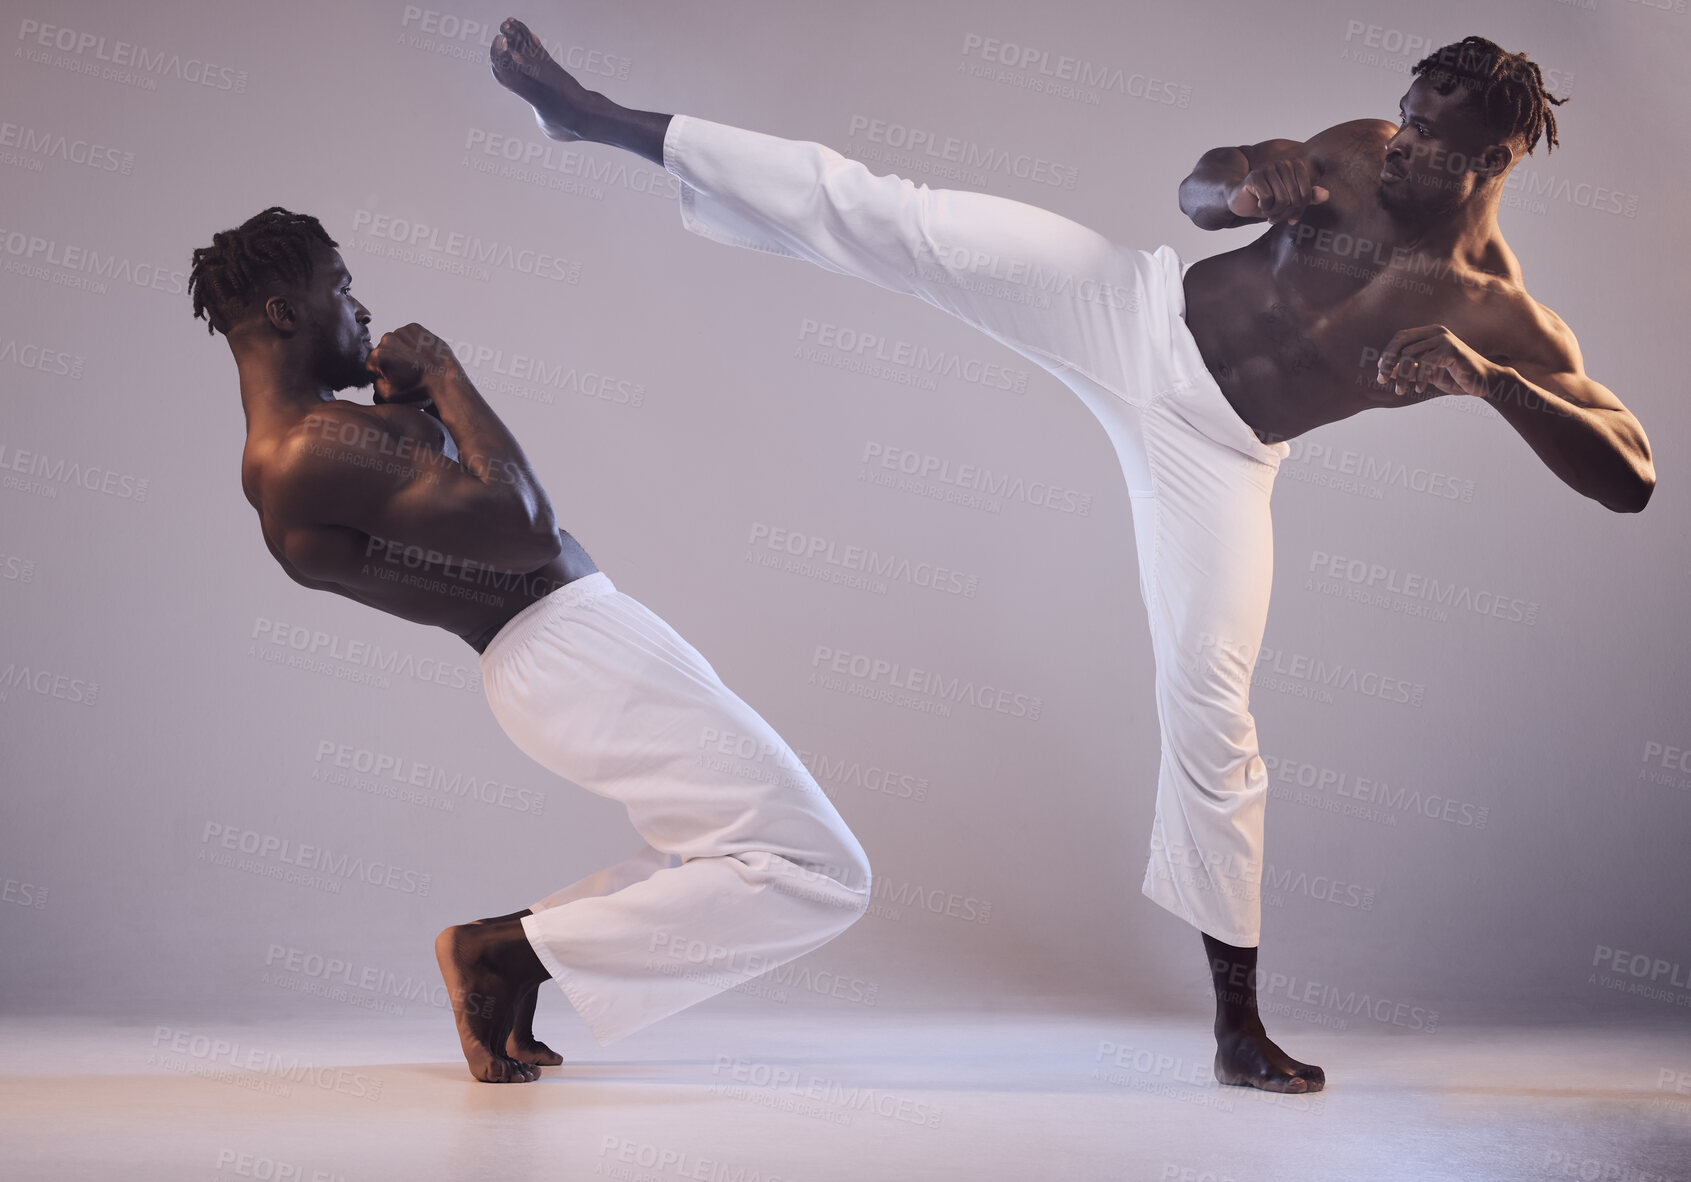 Buy stock photo Shot of two men fighting against a grey background